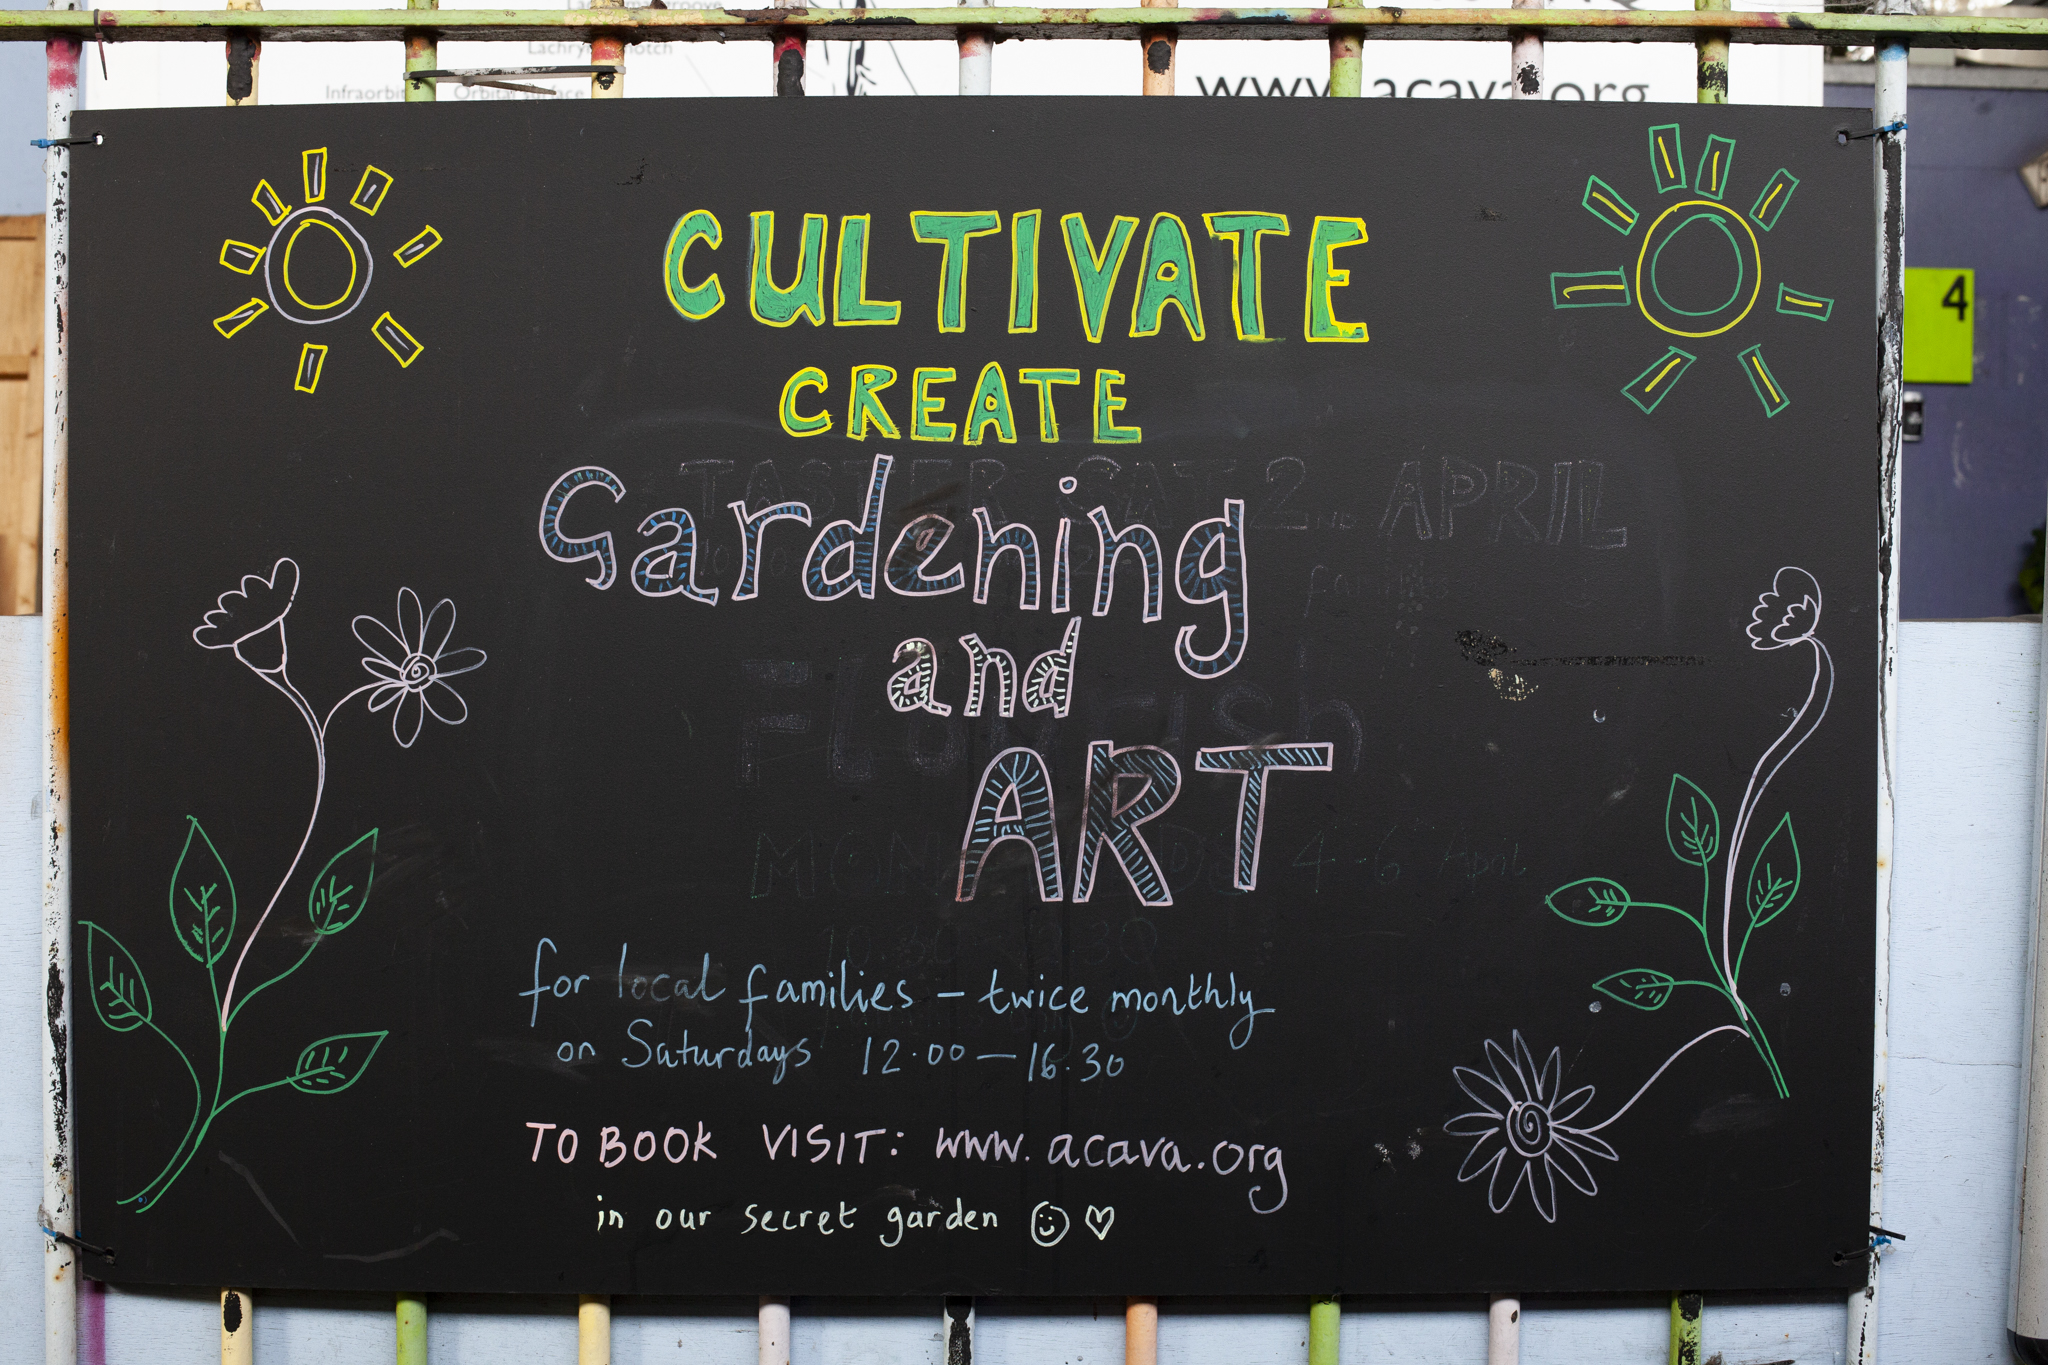 Cultivate Create returns for another year of gardening for families in West London